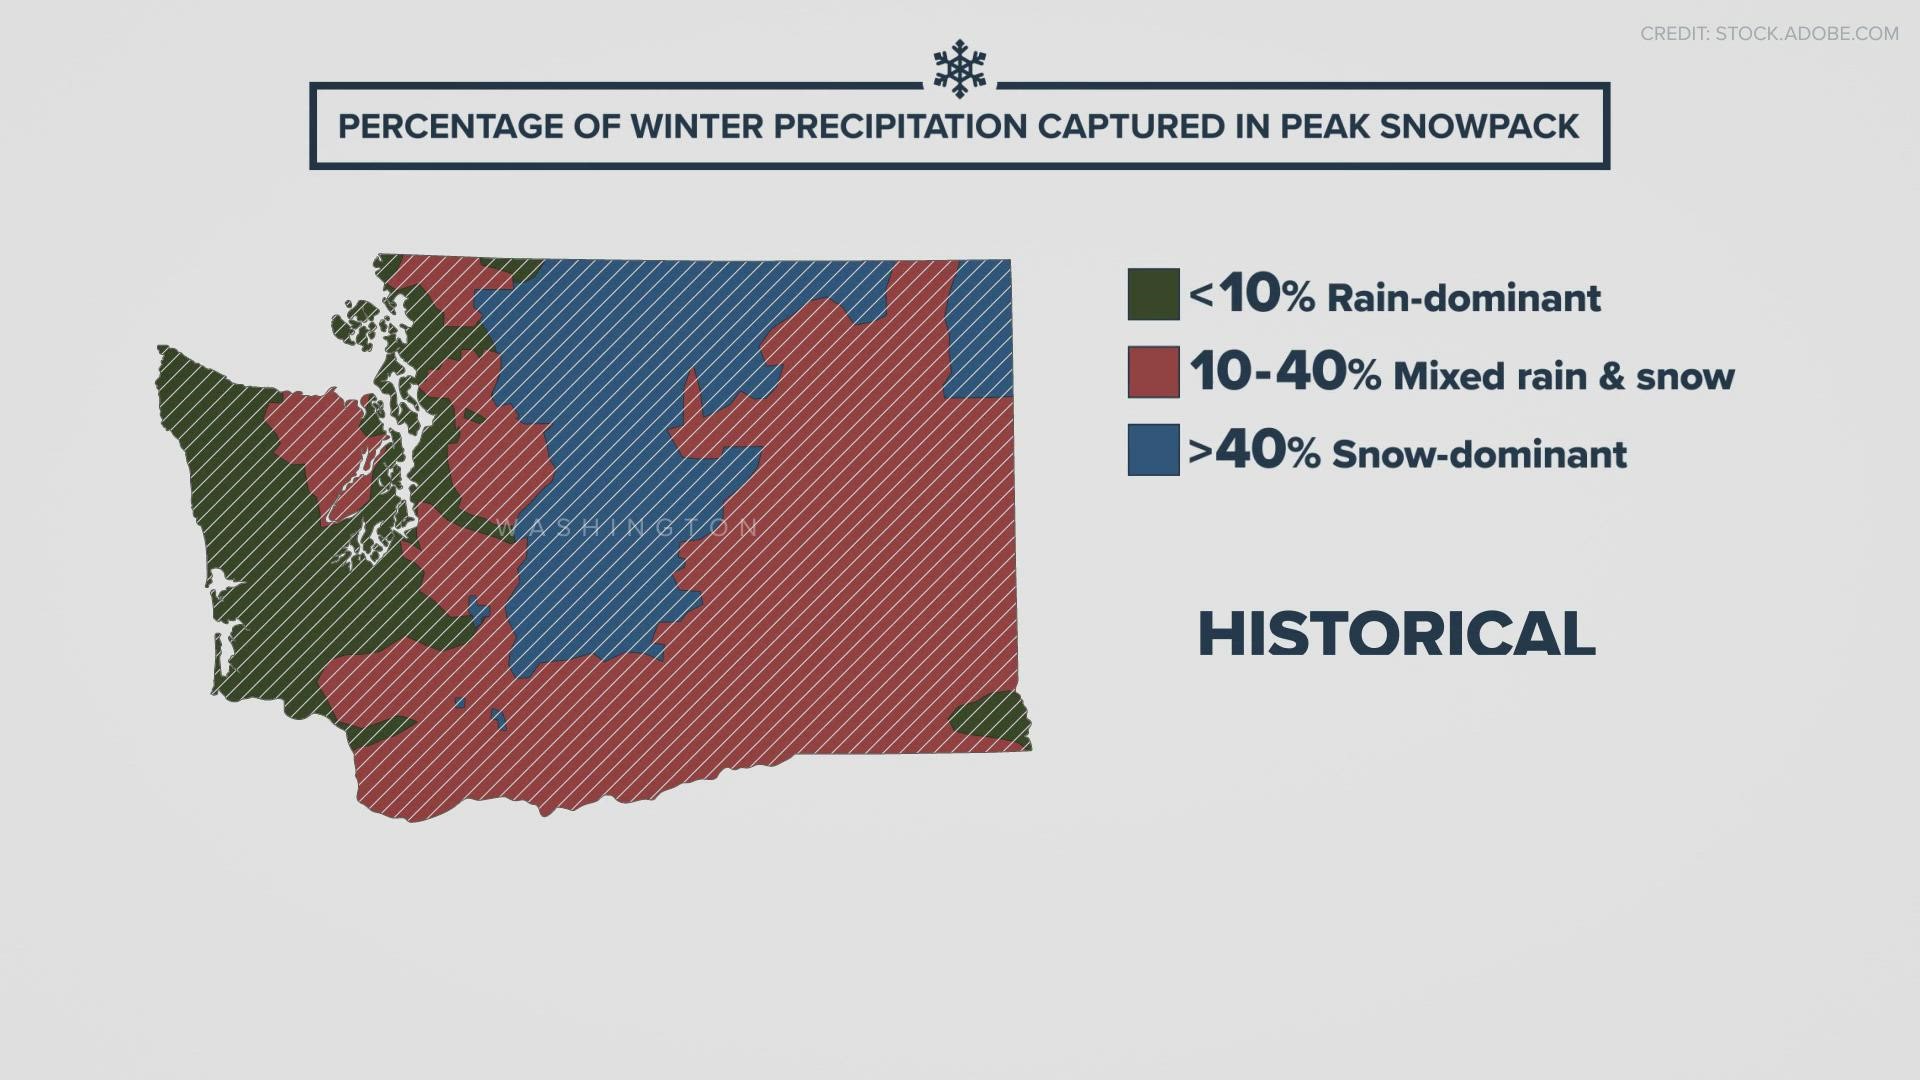 Washington's projected snowpack over the next several decades.